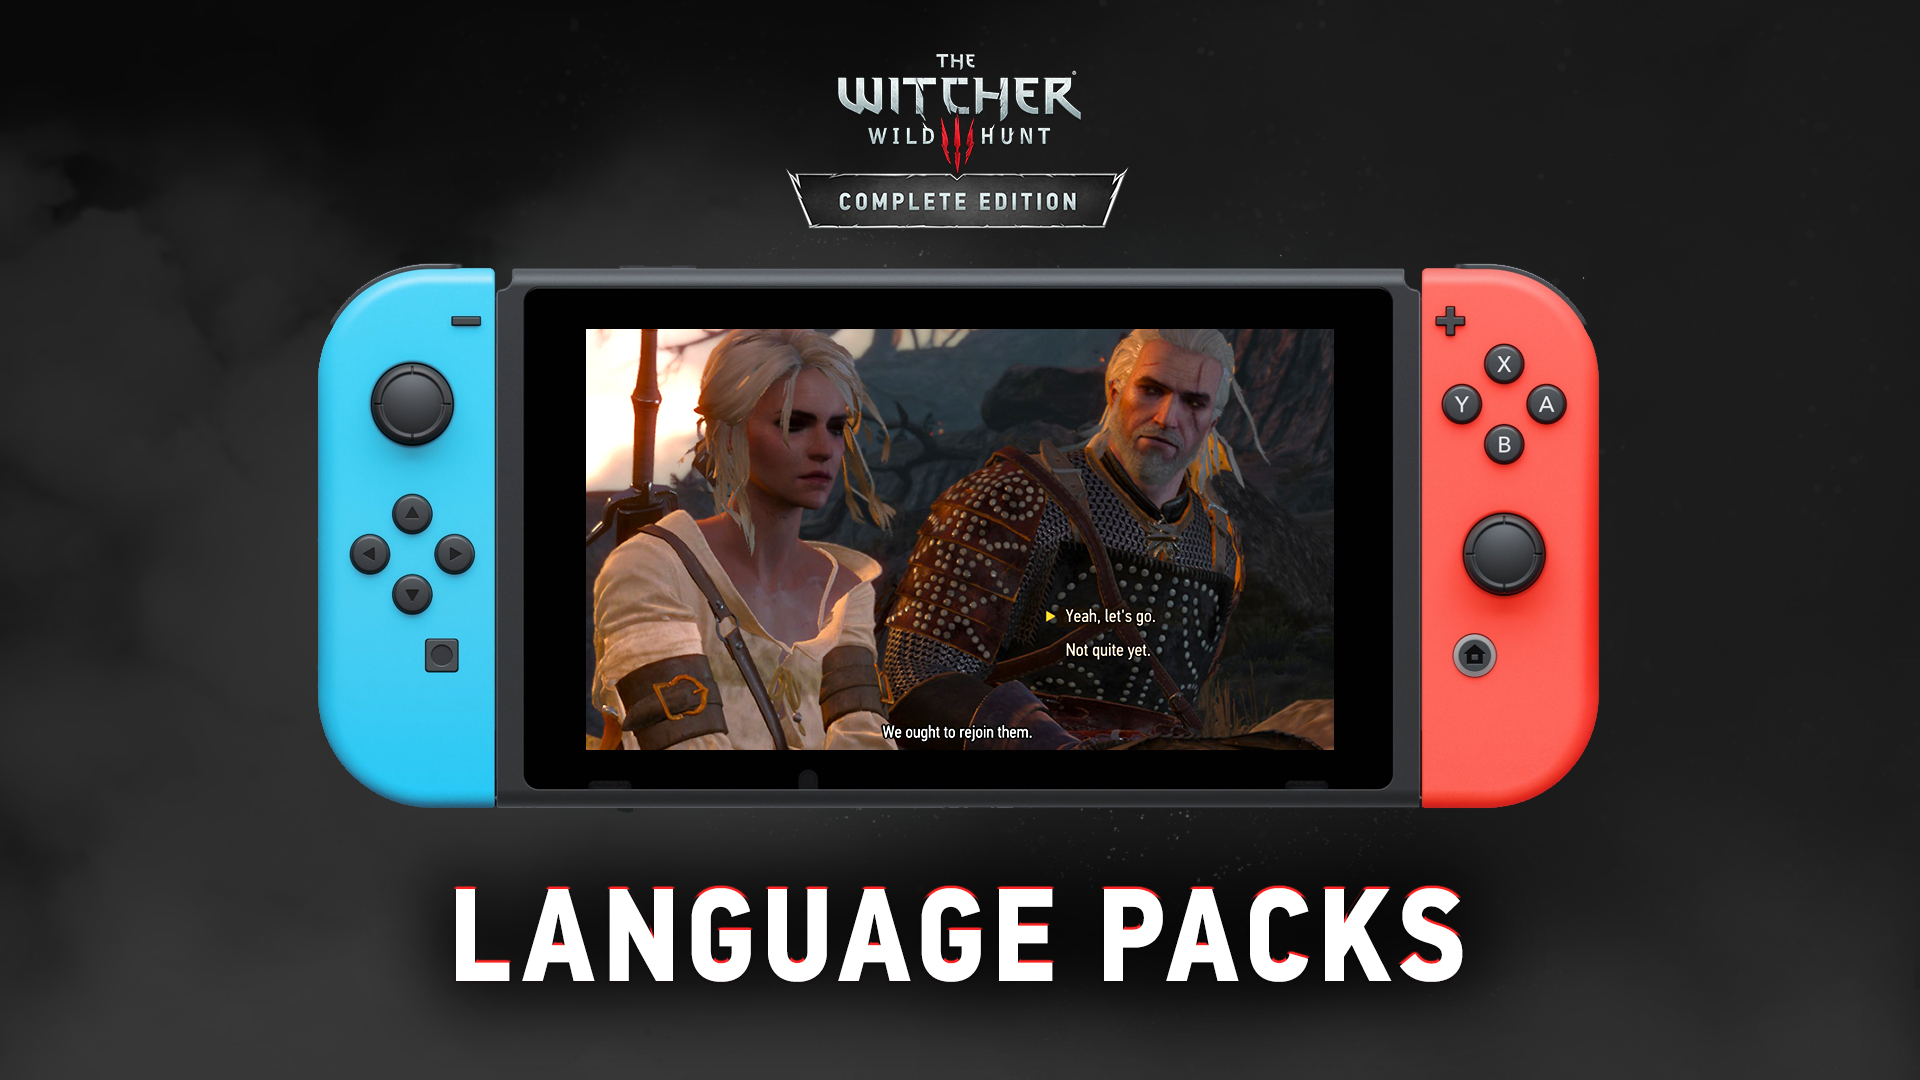 The Witcher Additional Voice Over Language Packs For The Witcher 3 Wild Hunt On Nintendo Switch Are Here They Have Been Added As Free Dlcs In Selected Regions T Co Didbihdy6l